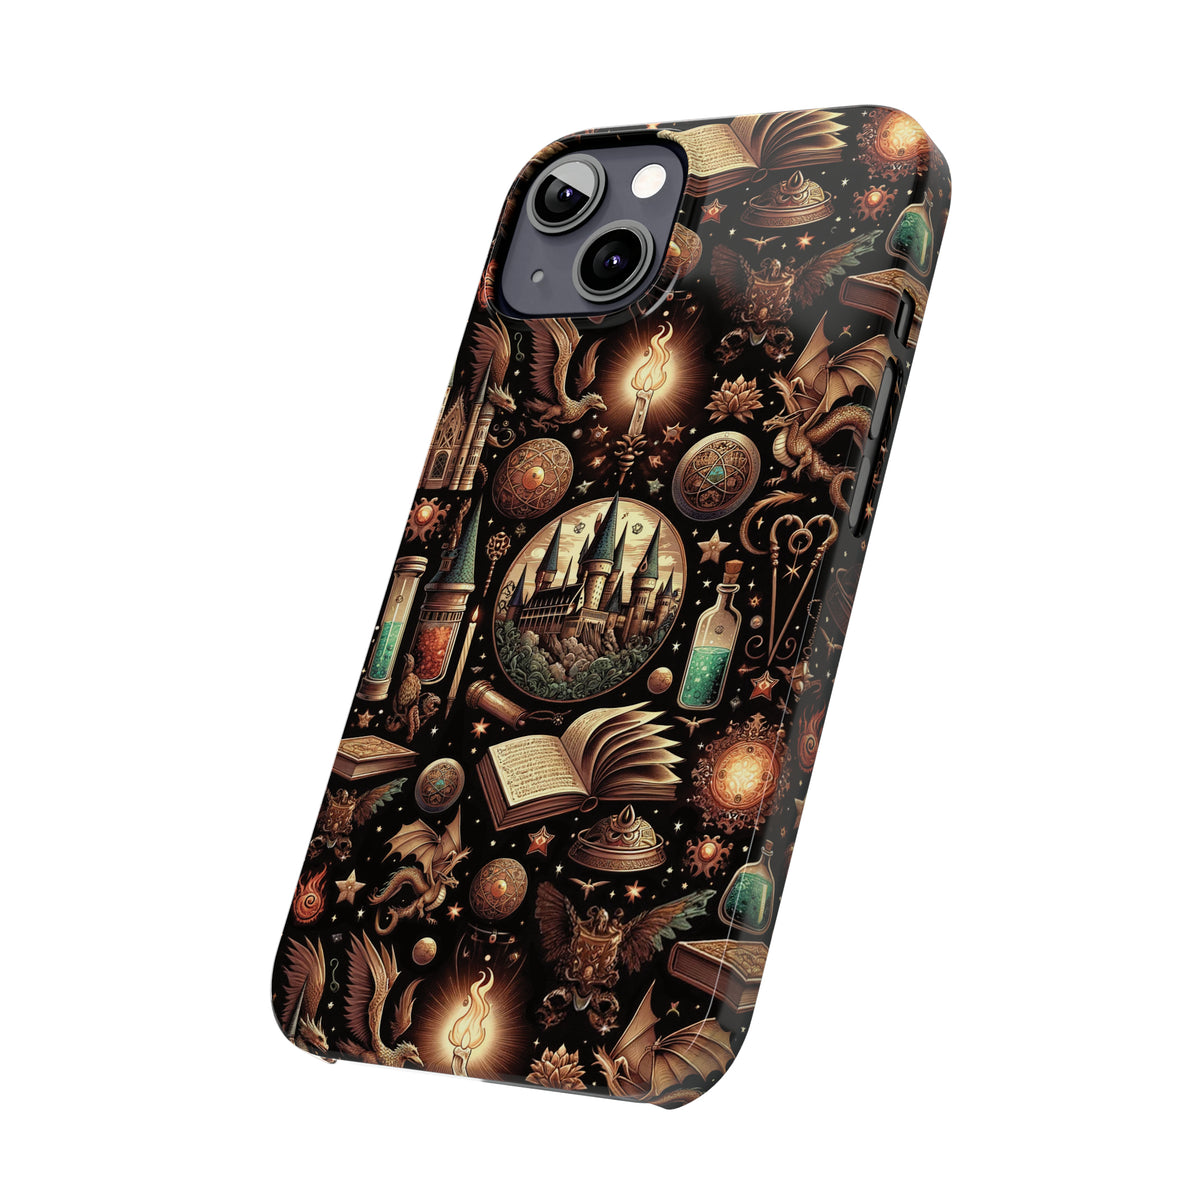 Magical World and Wizard Phone Case